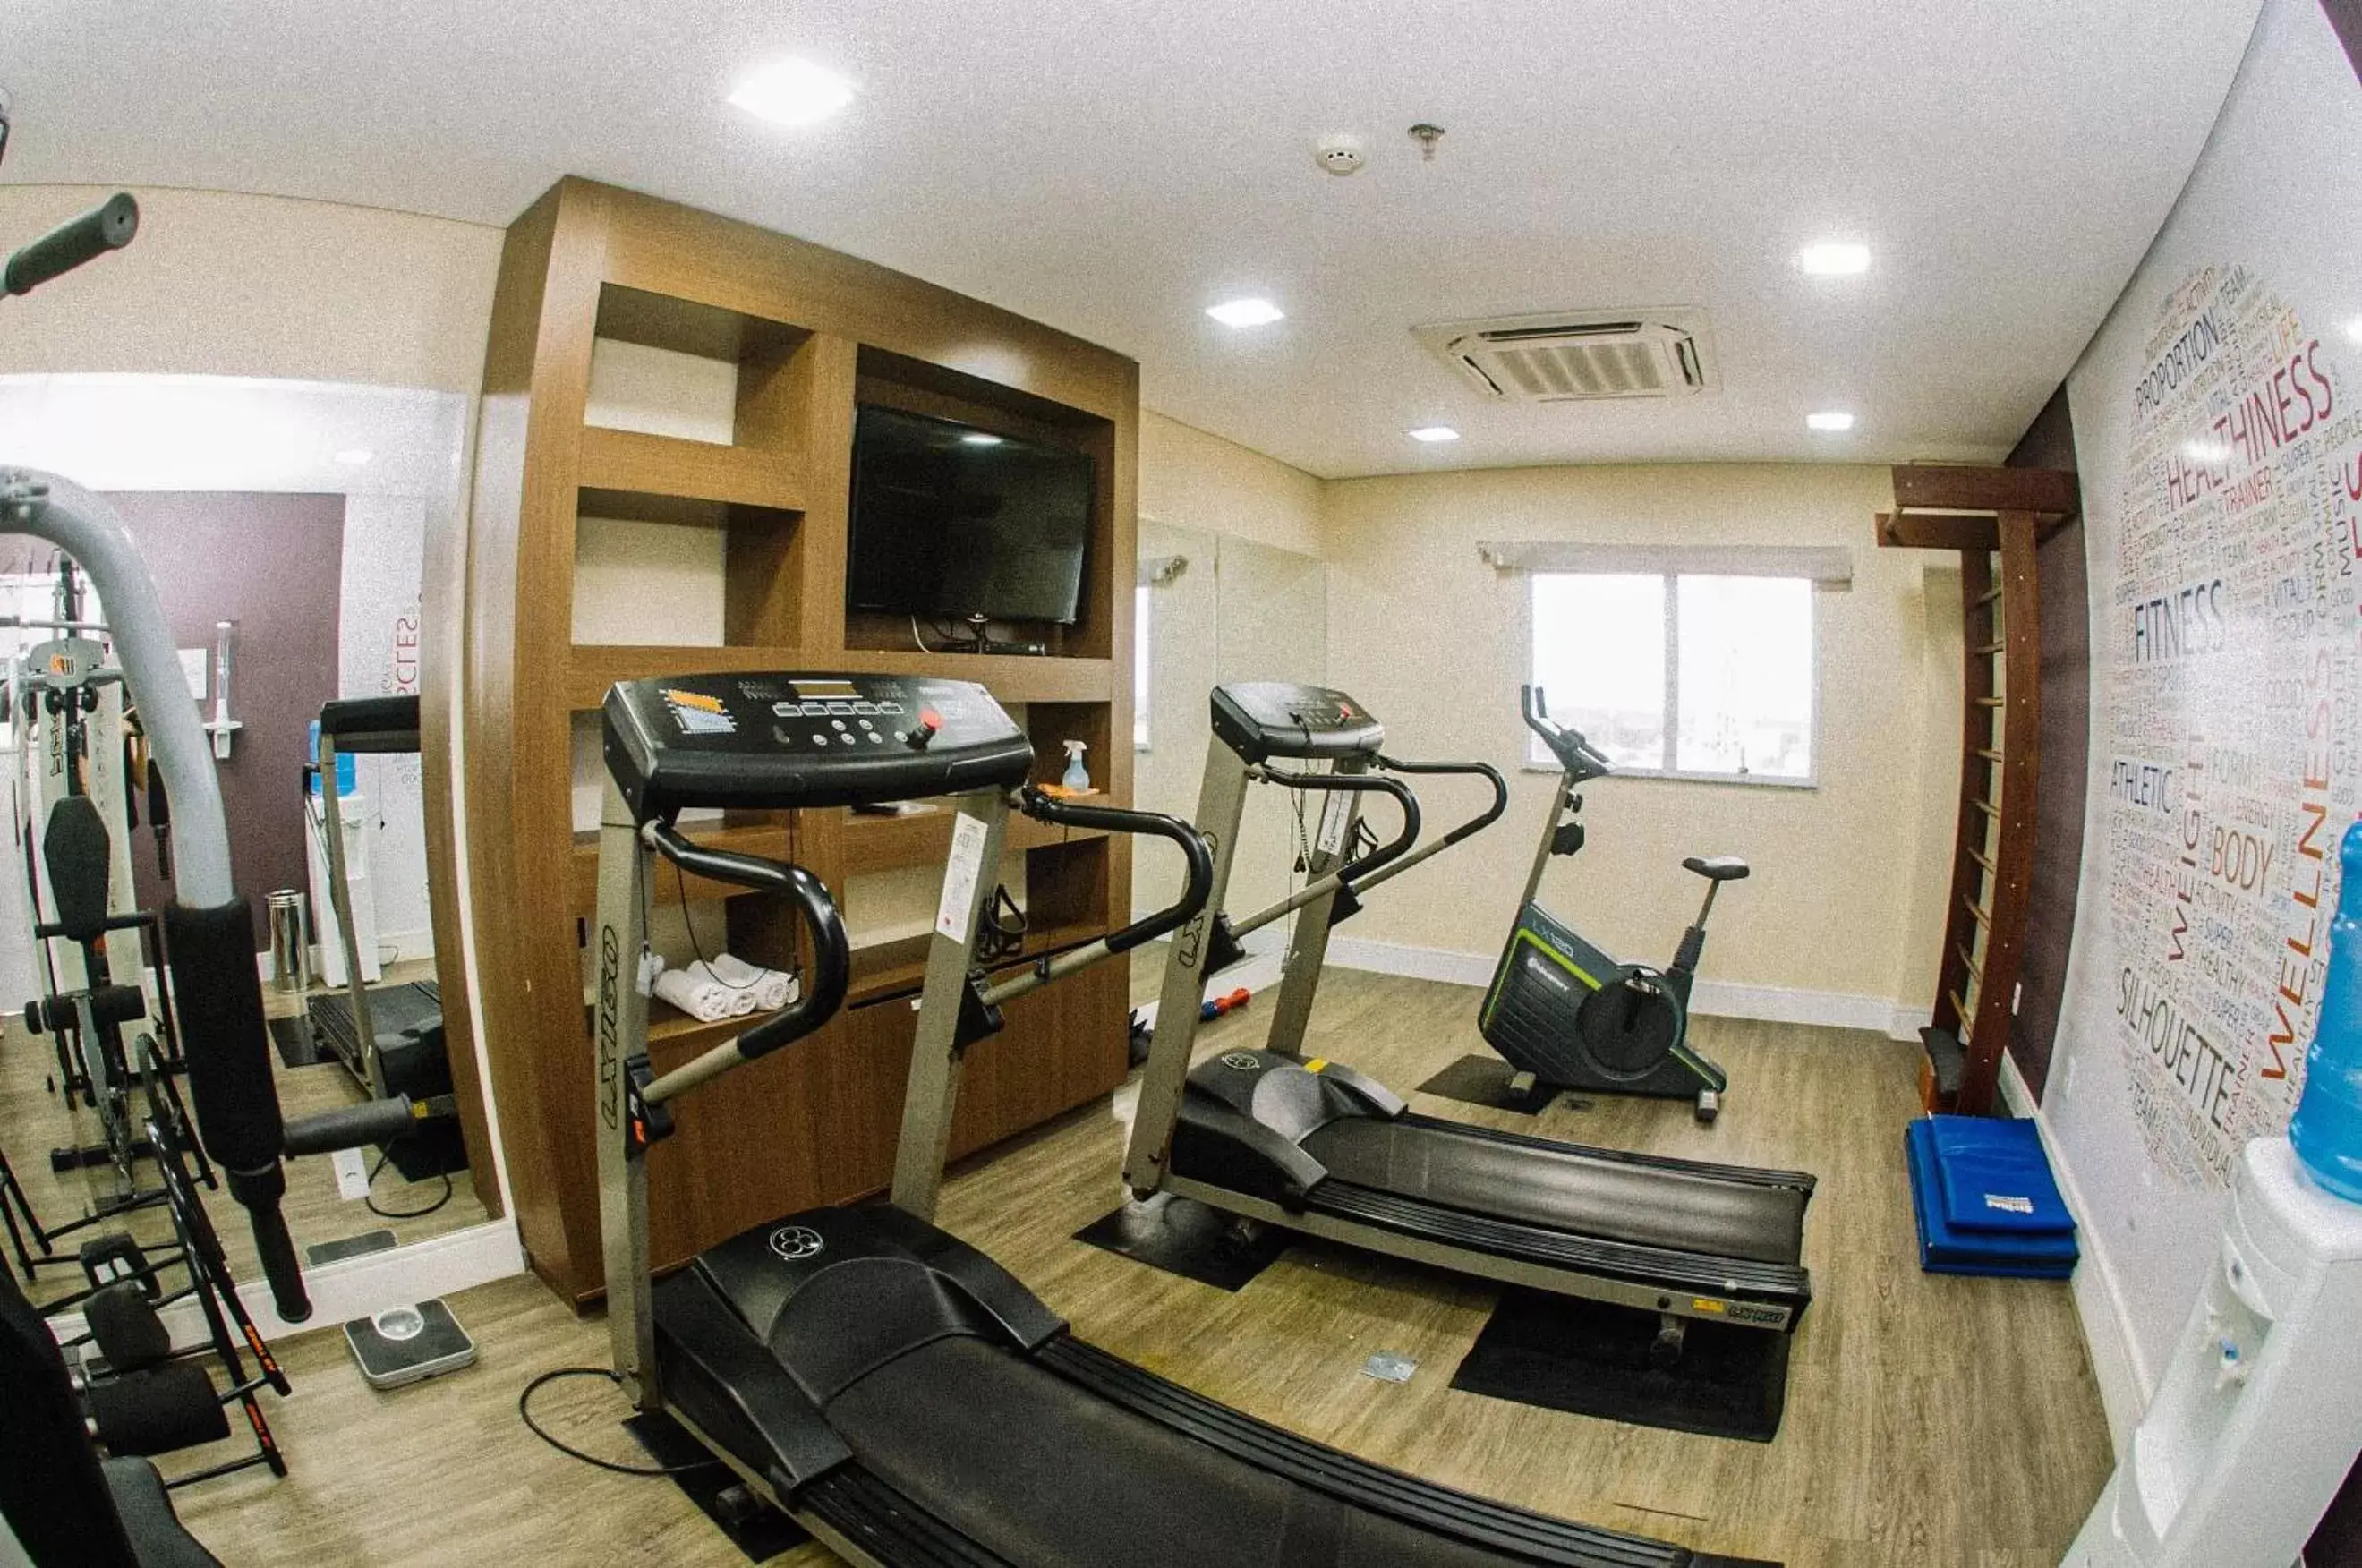 Fitness centre/facilities, Fitness Center/Facilities in Diff Hotel